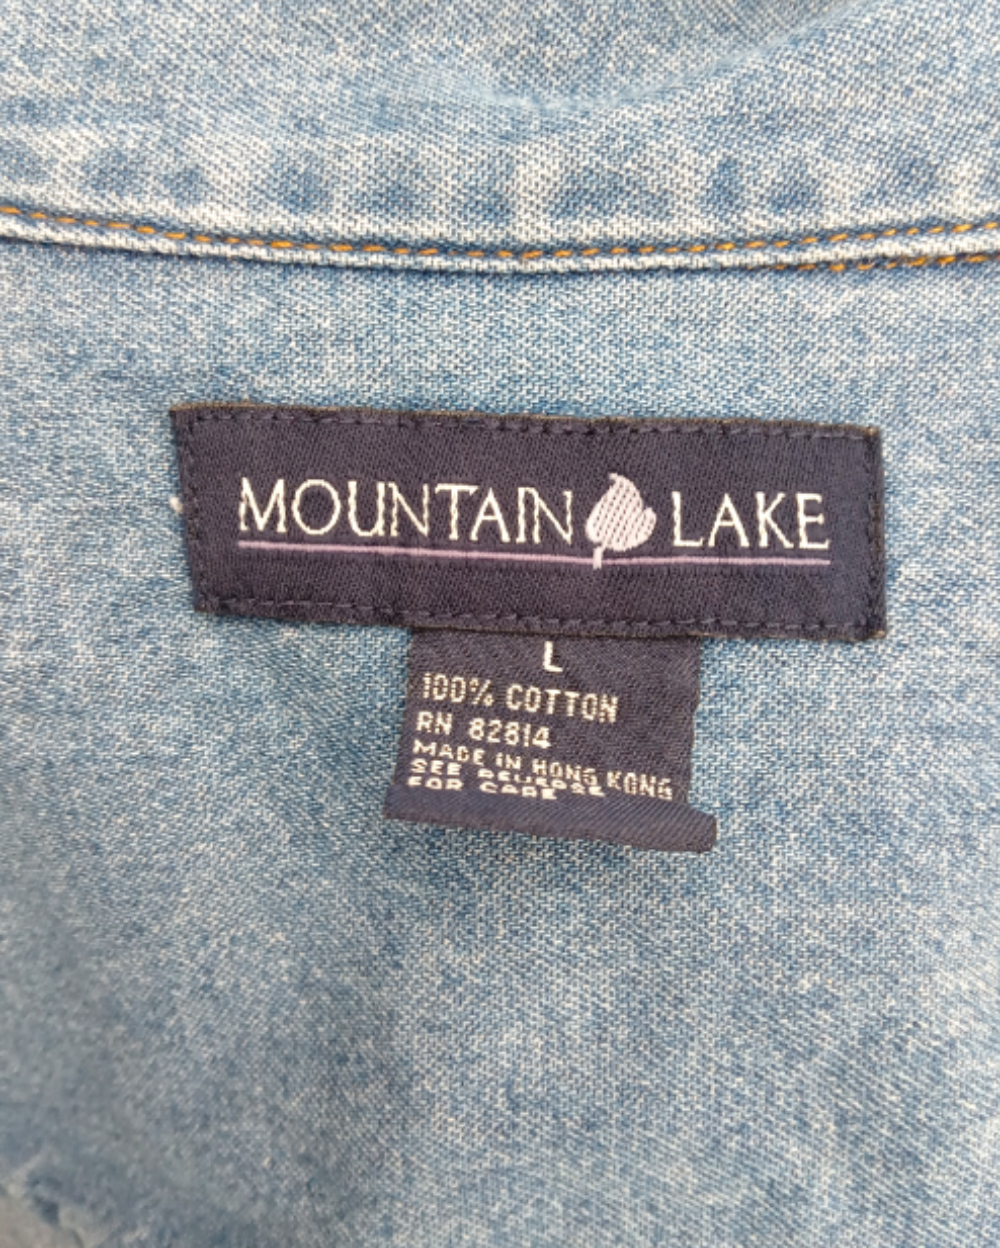 Chaquetas y Chalecos Casuales Mountainlake